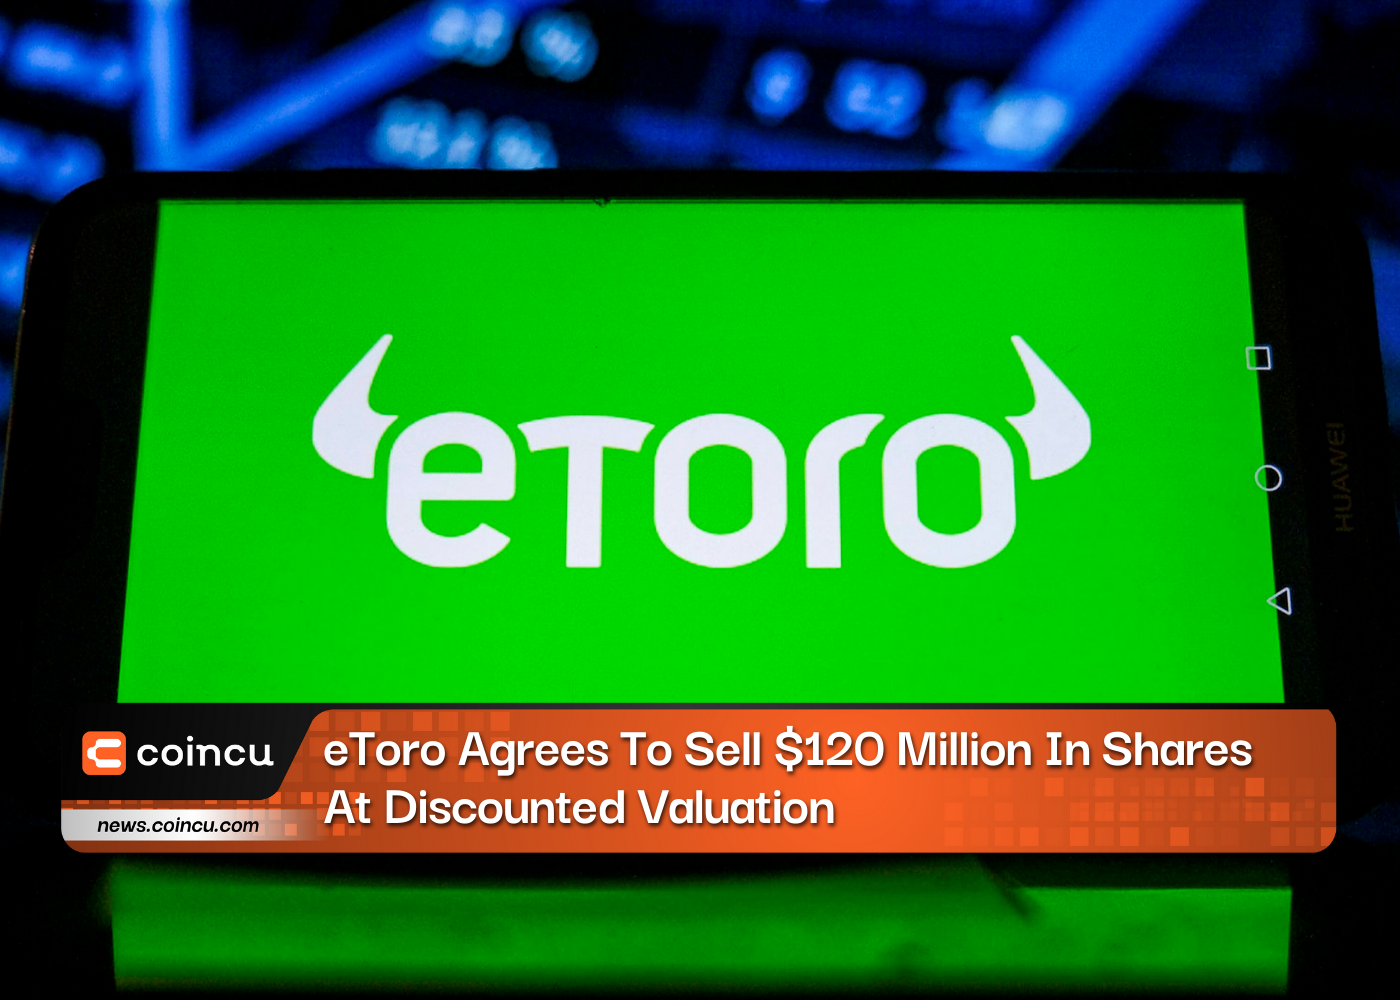 eToro Agrees To Sell $120 Million In Shares At Discounted Valuation